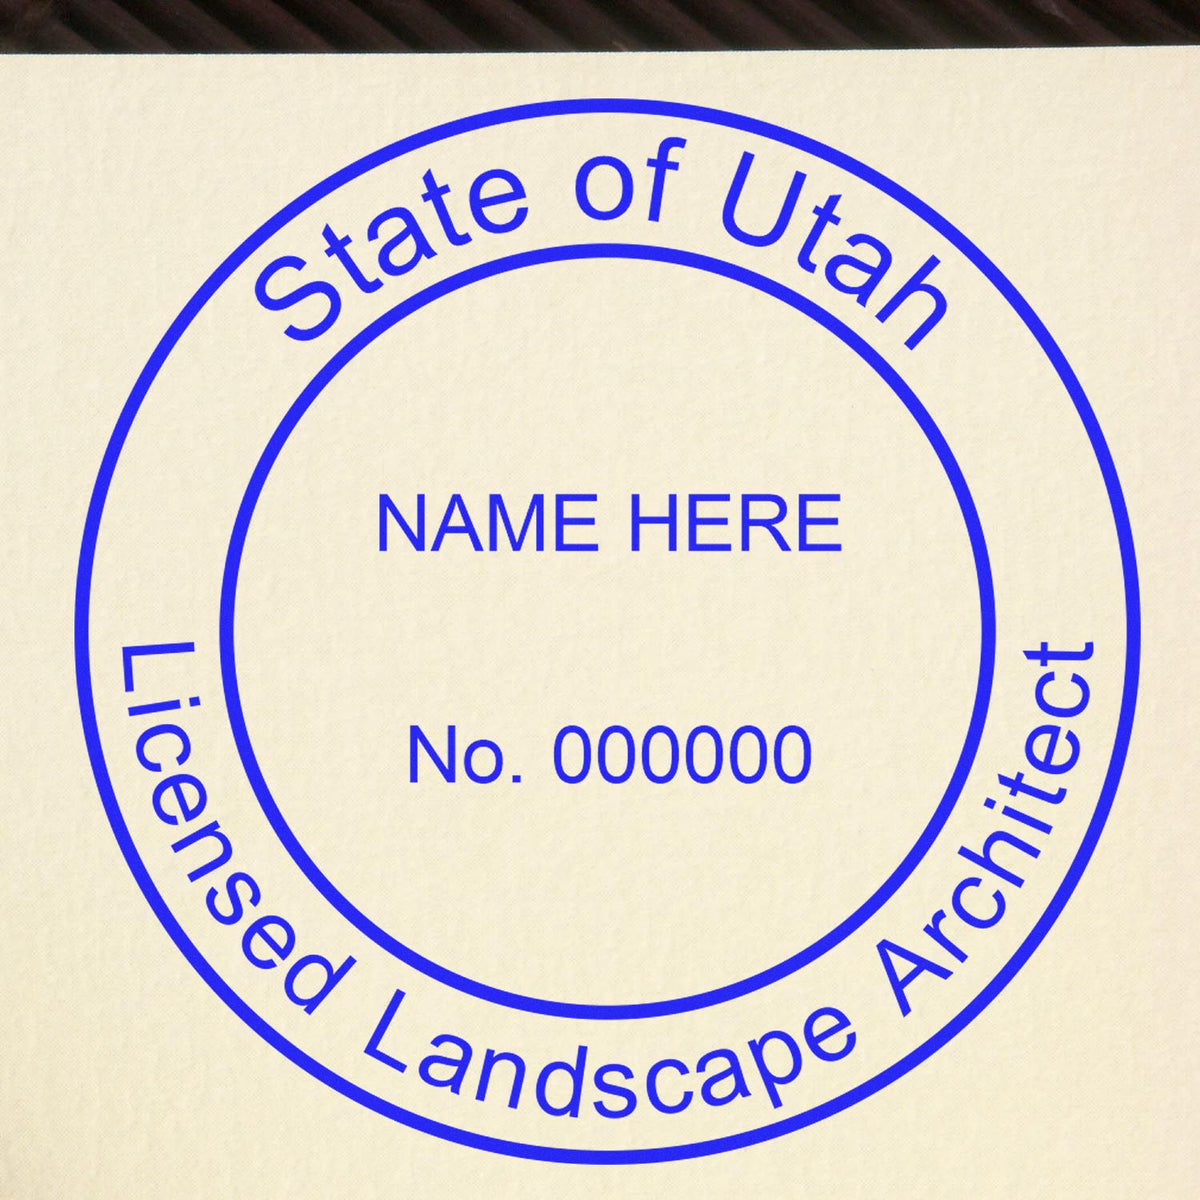 Utah Landscape Architectural Seal Stamp in use photo showing a stamped imprint of the Utah Landscape Architectural Seal Stamp